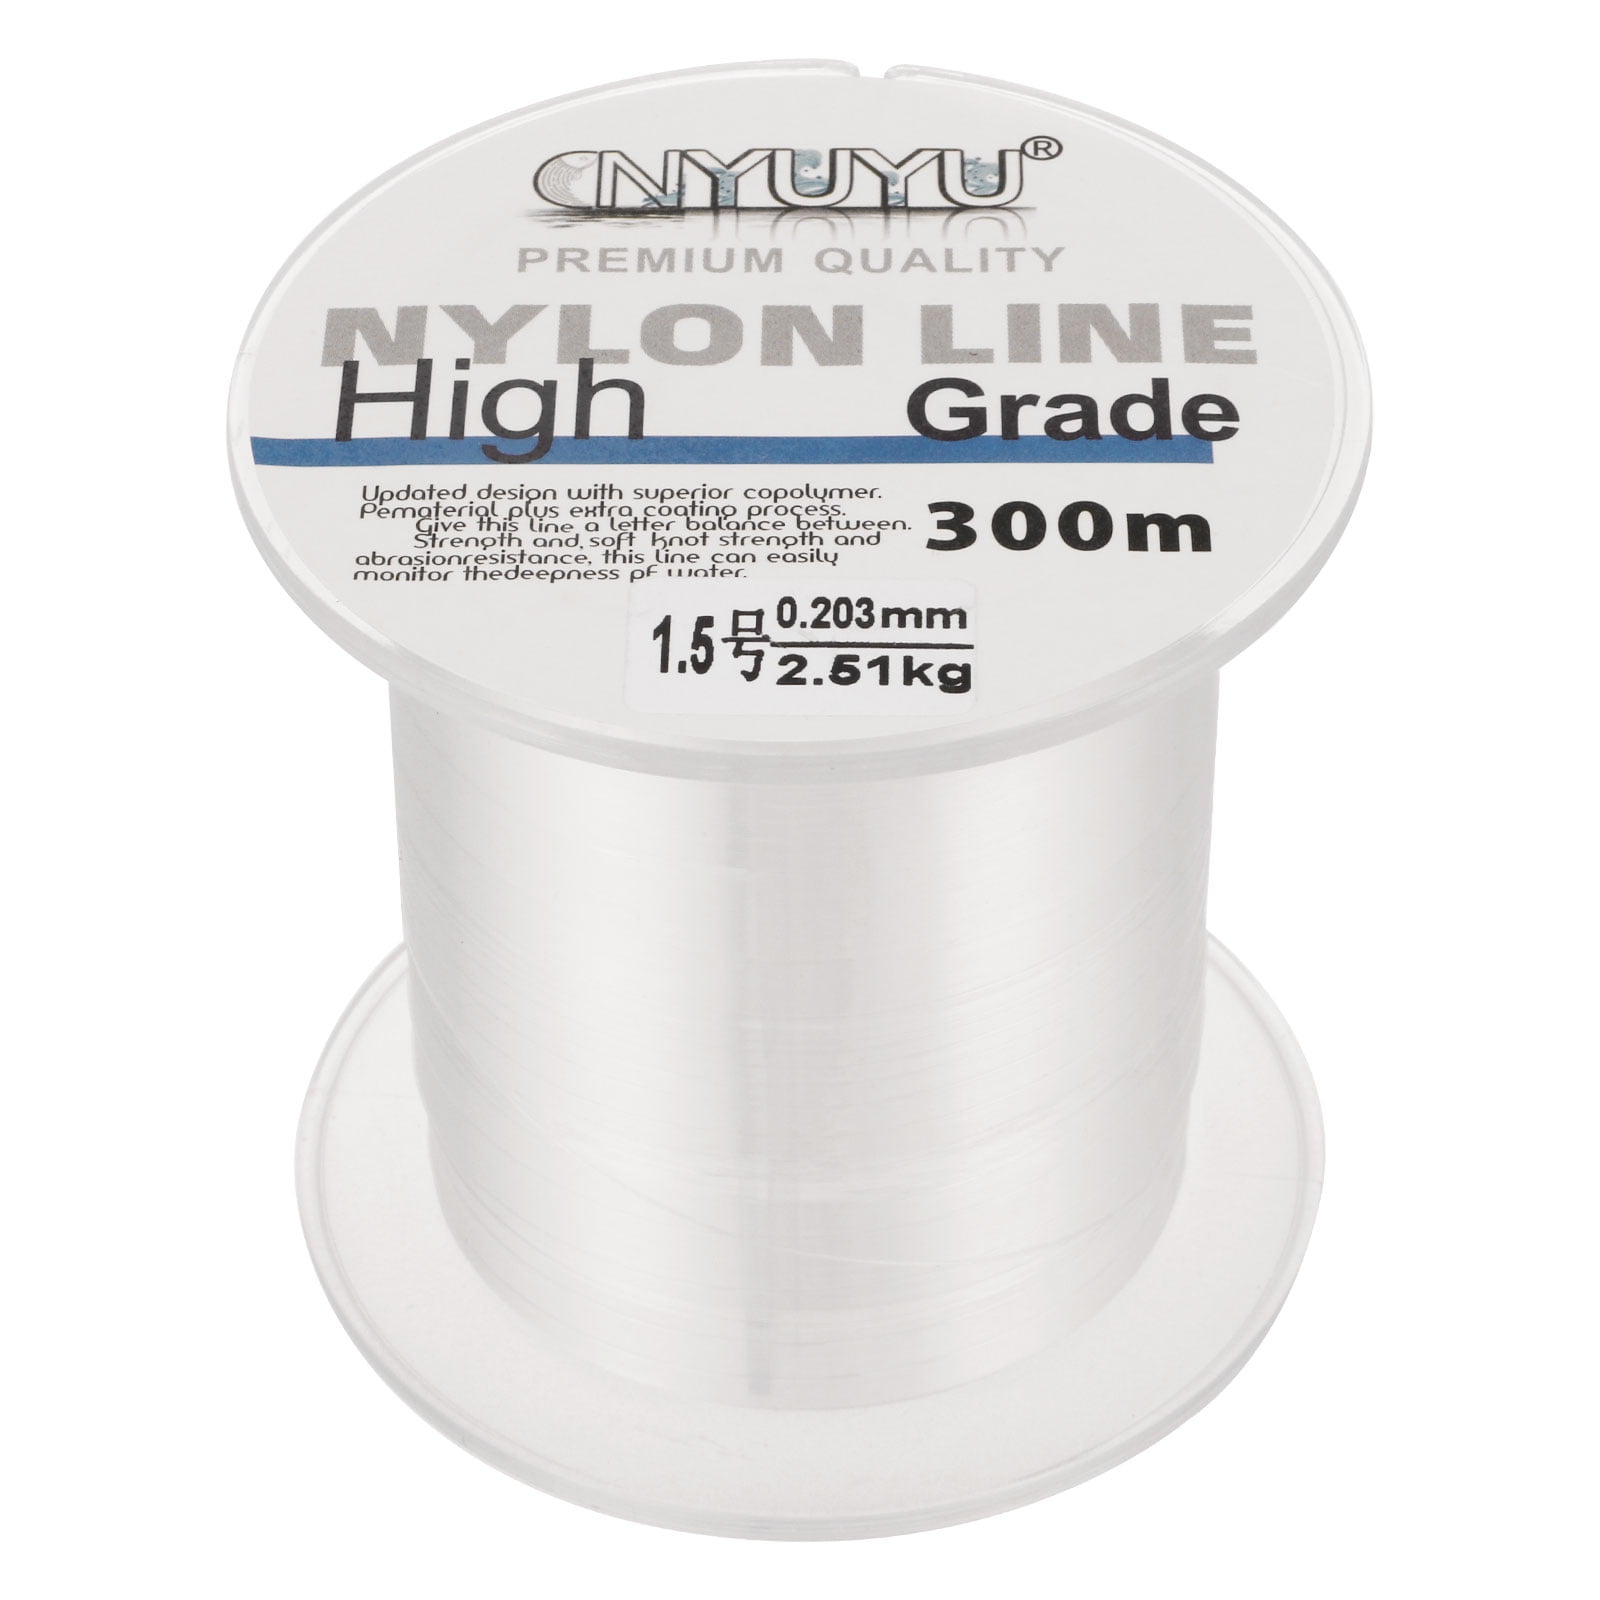 Fluorocarbon Spotted Fishing Line /547yds Monofilament Nylon